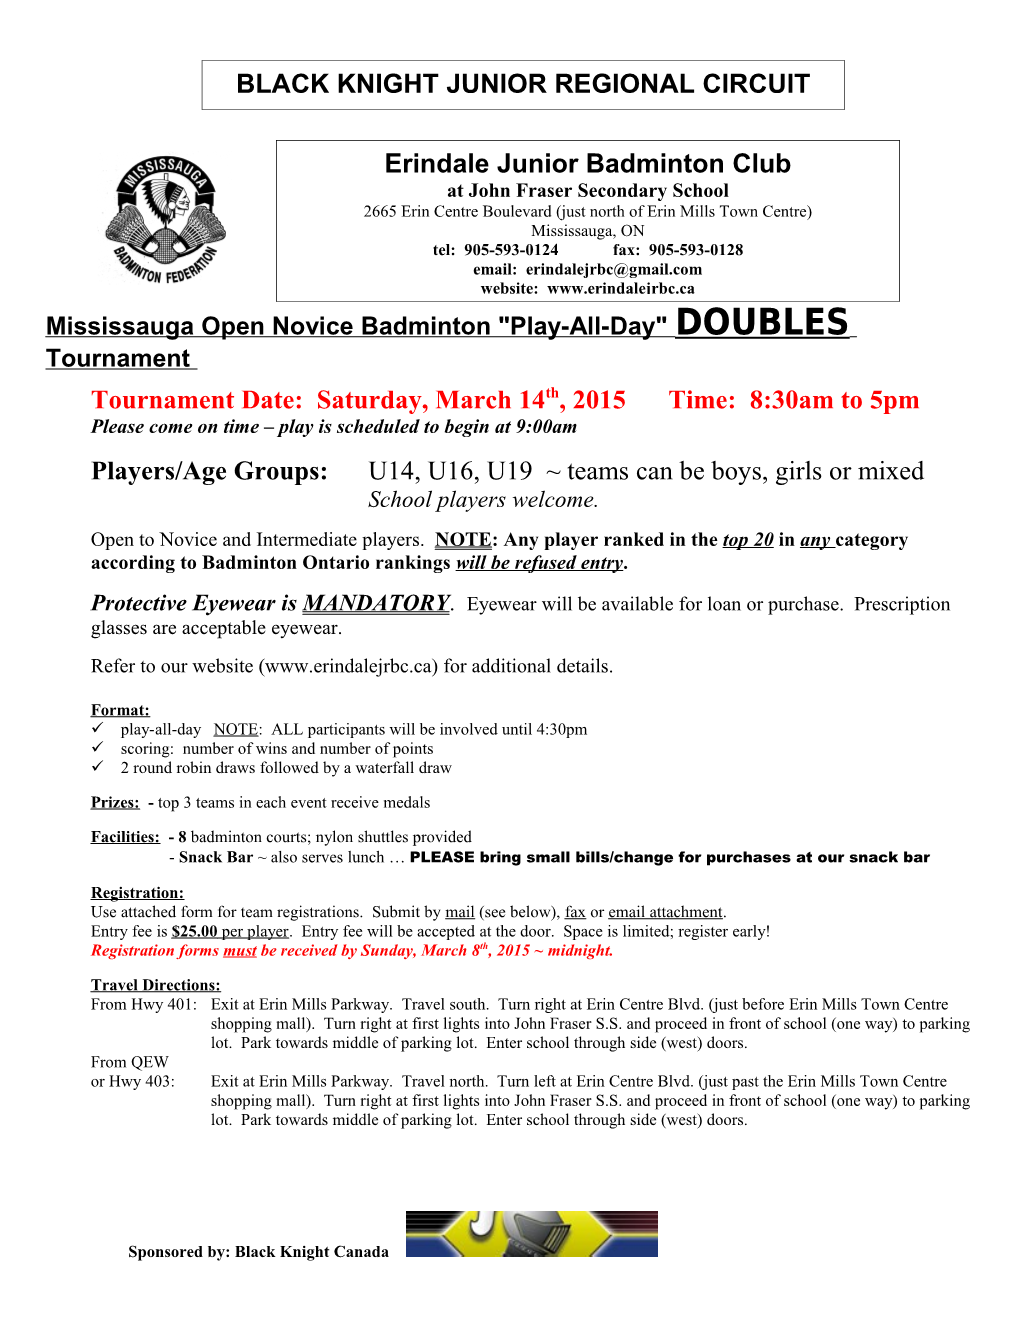 Mississauga Open Novice Badminton Play-All-Day DOUBLES Tournament